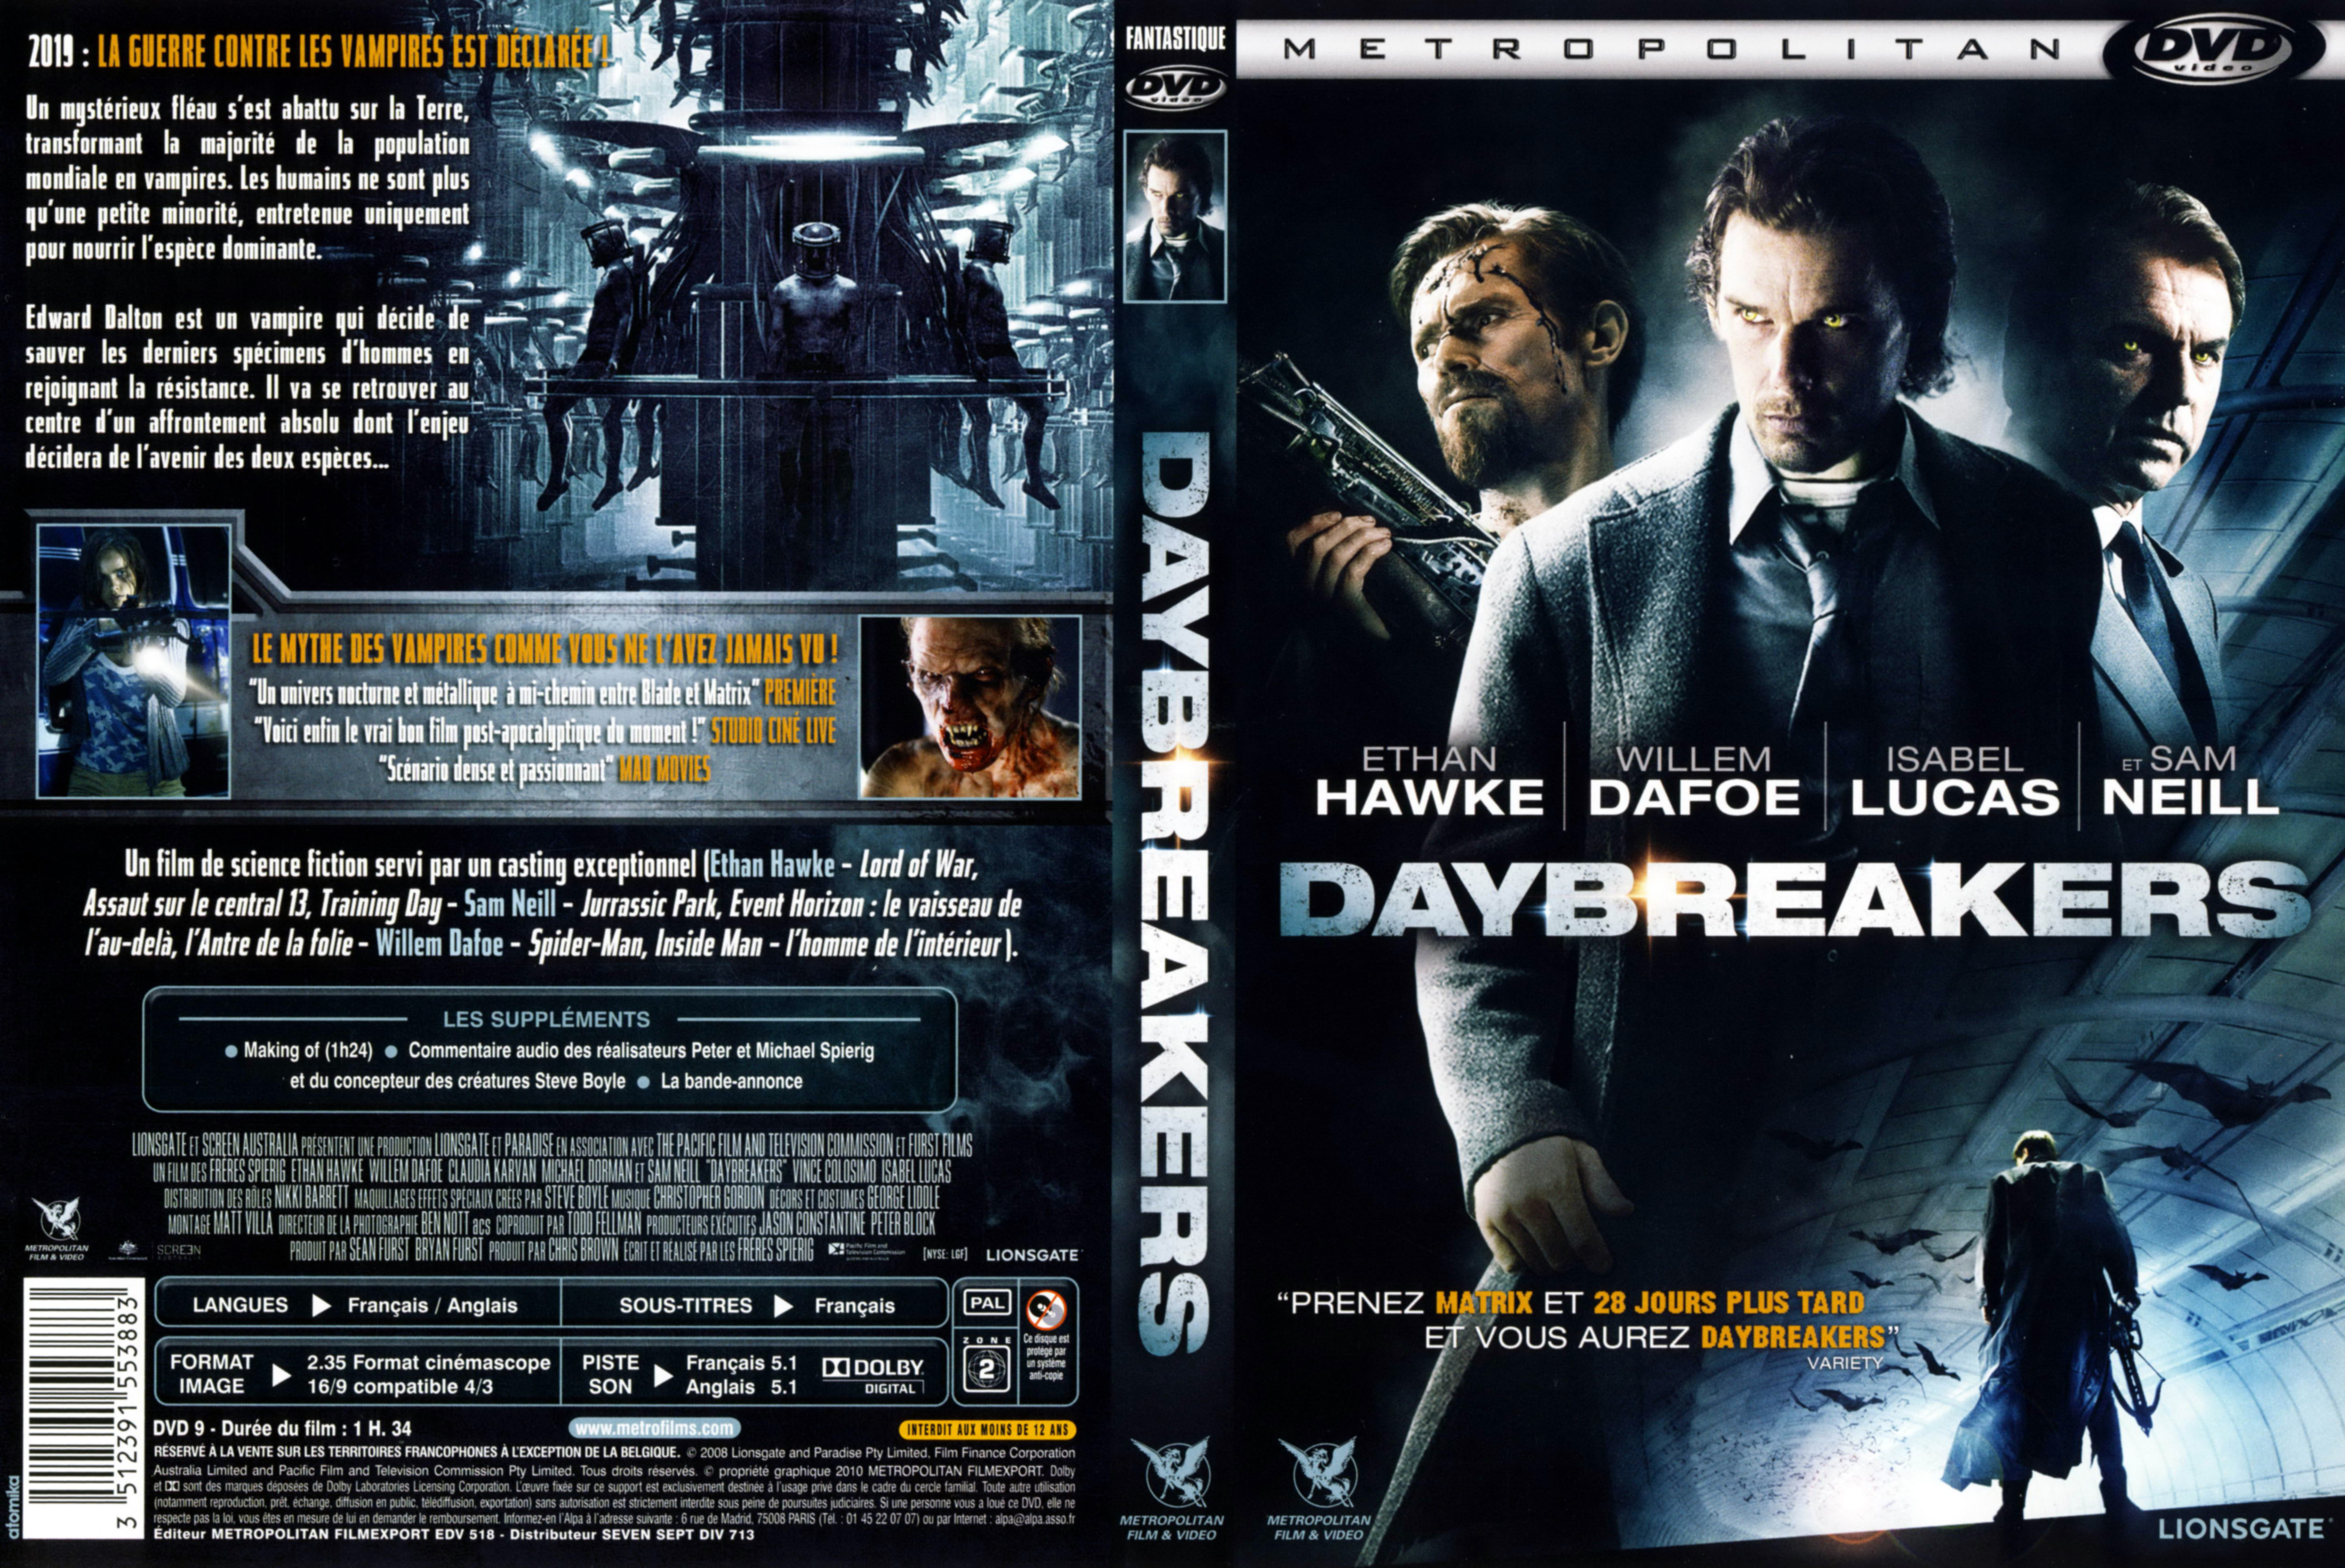 Jaquette DVD Daybreakers